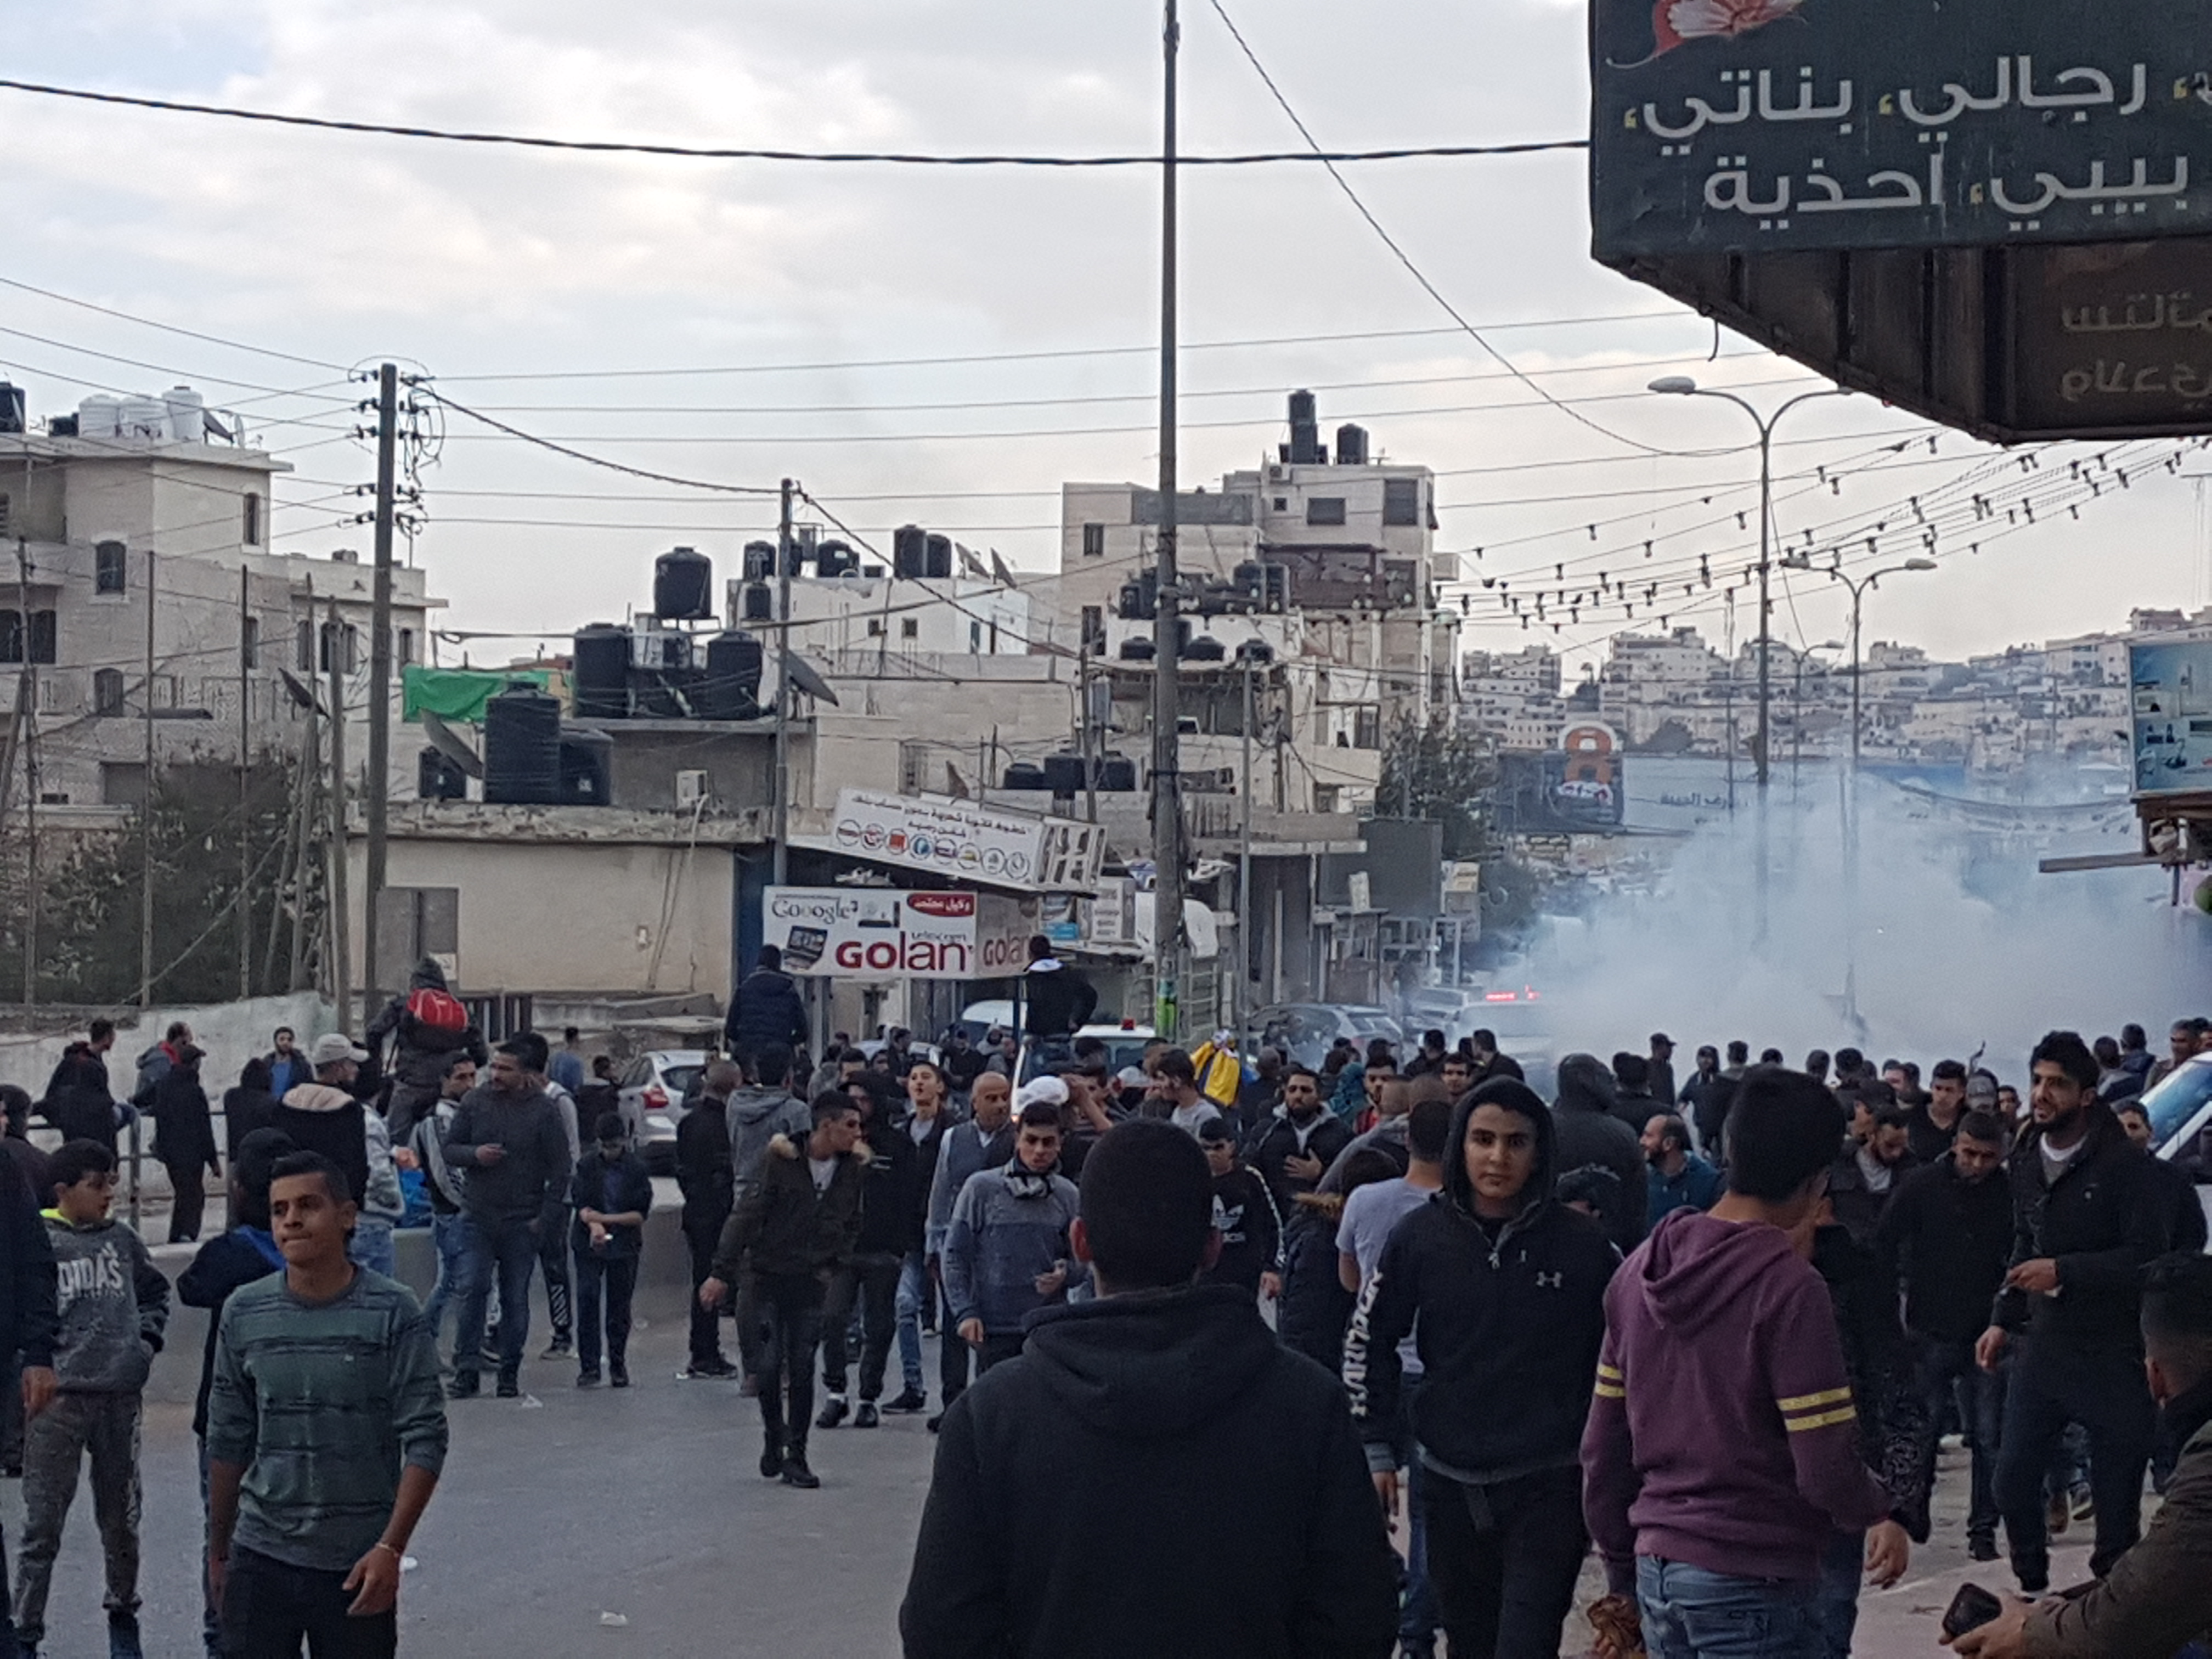 Protesters in Qalandia refugee camp